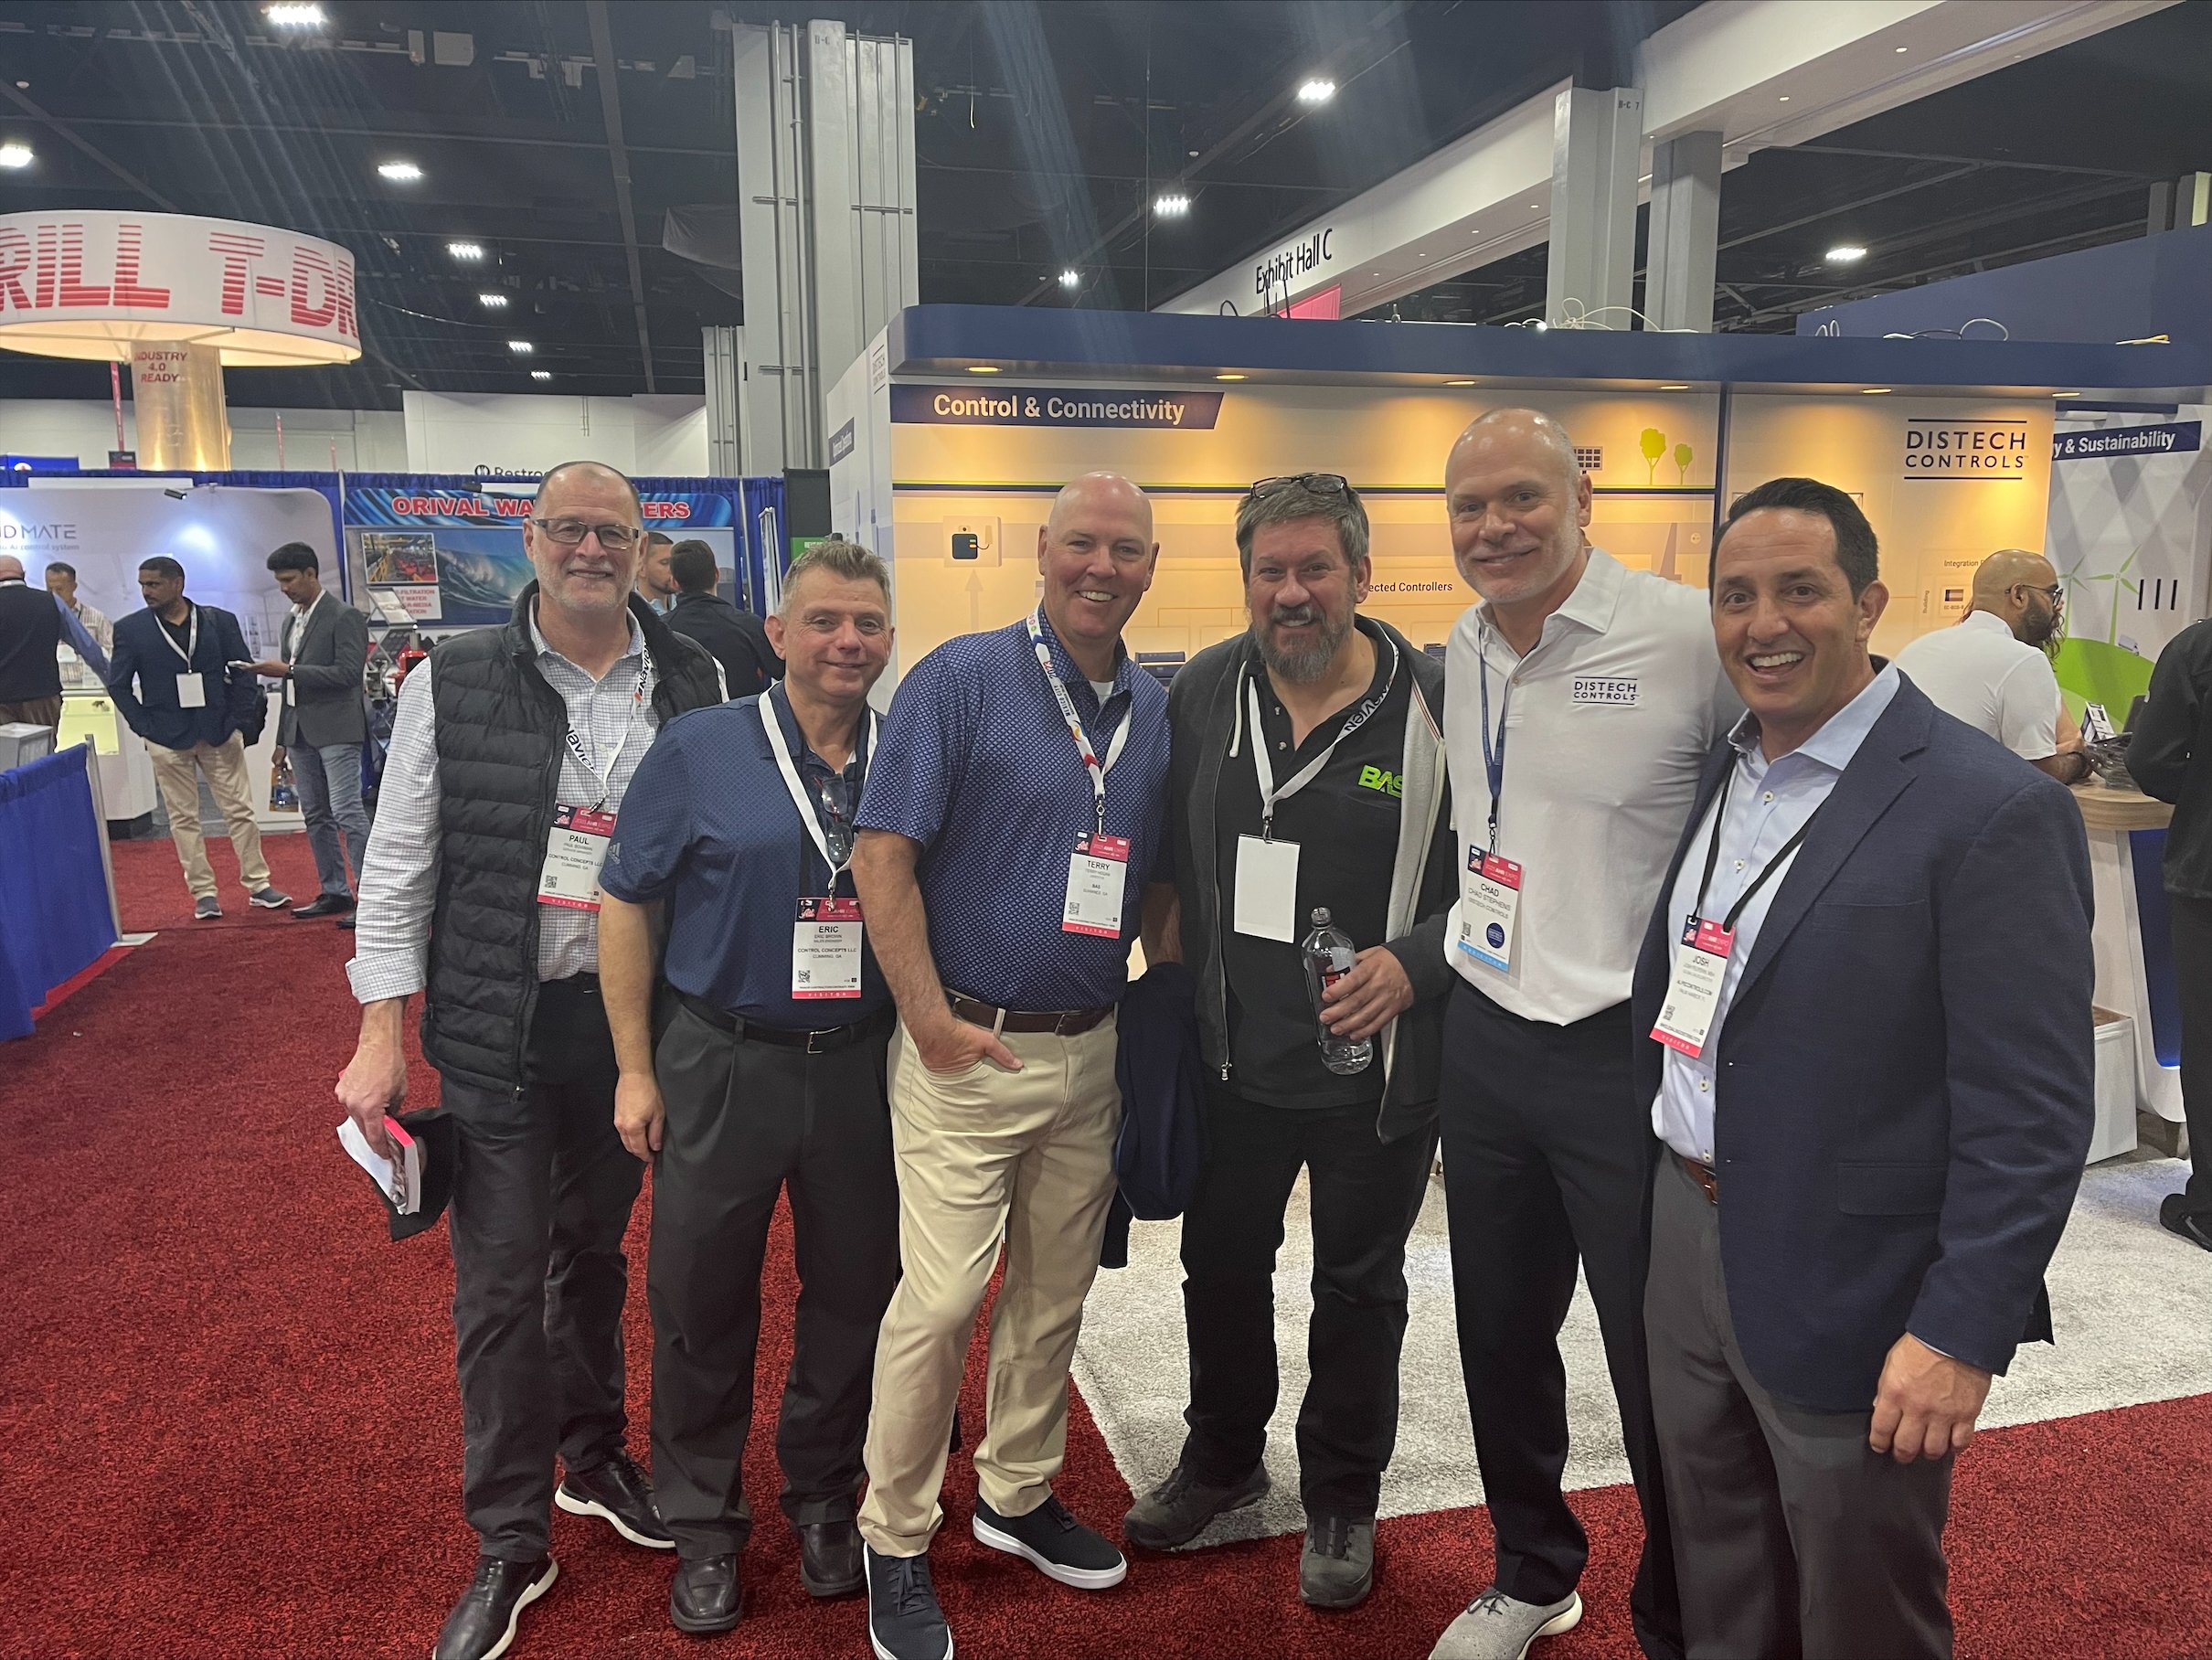 Our Josh Felperin (on the right) connecting with Paul Bowman and Eric Brown of Control Concepts; Terry Hogan and Craig Ragone of Building Automation Solutions; and Chad Stephens from Distech Controls.